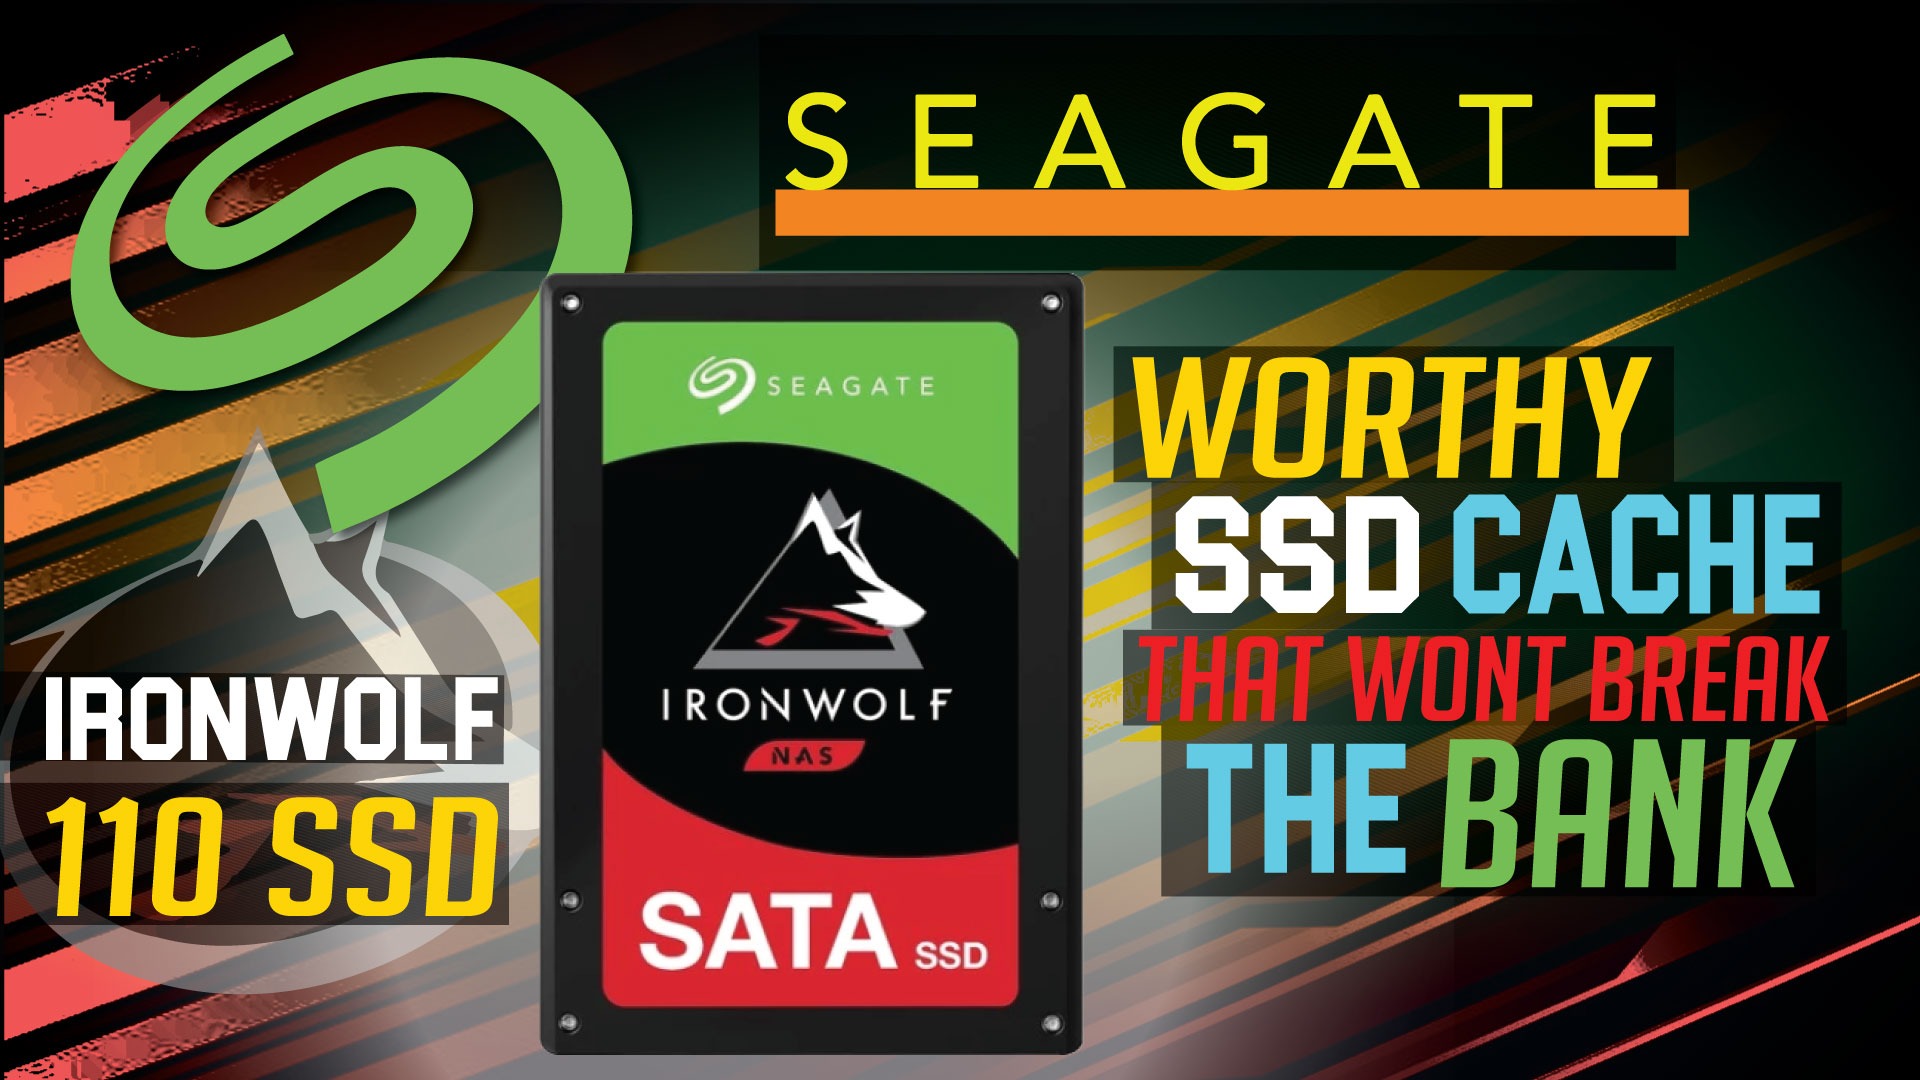 Seagate IronWolf 110 2.5-inch SSD: Up to 4TB of NAS storage